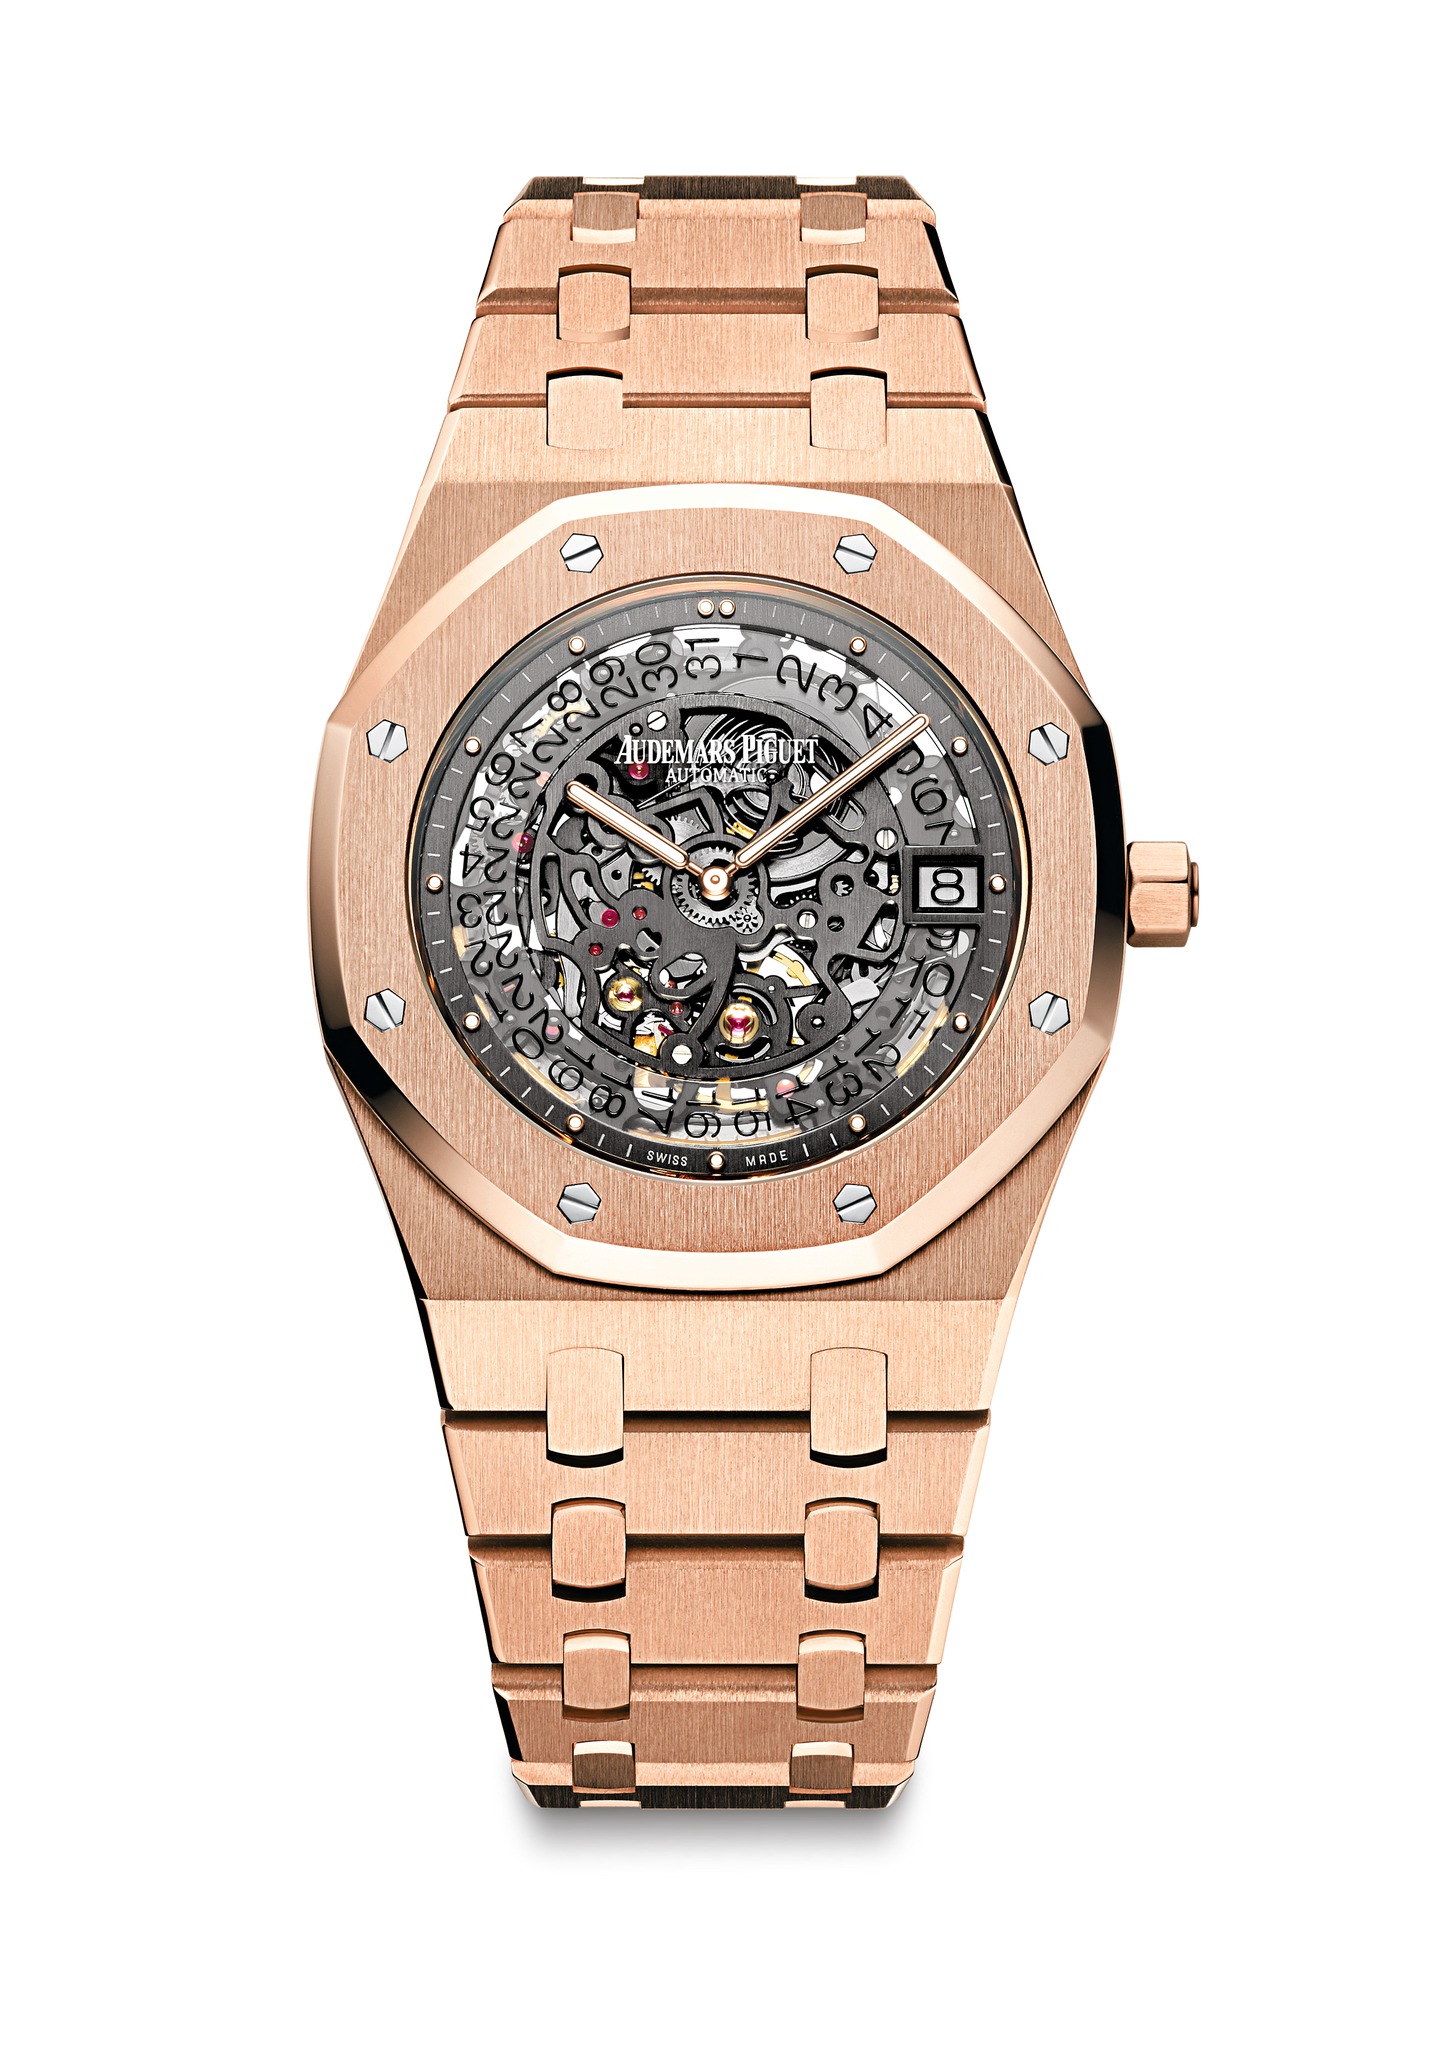 Audemars Piguet New Royal Oak Openworked Extra-Thin Pink Gold watch REF: 15204OR.OO.1240OR.01